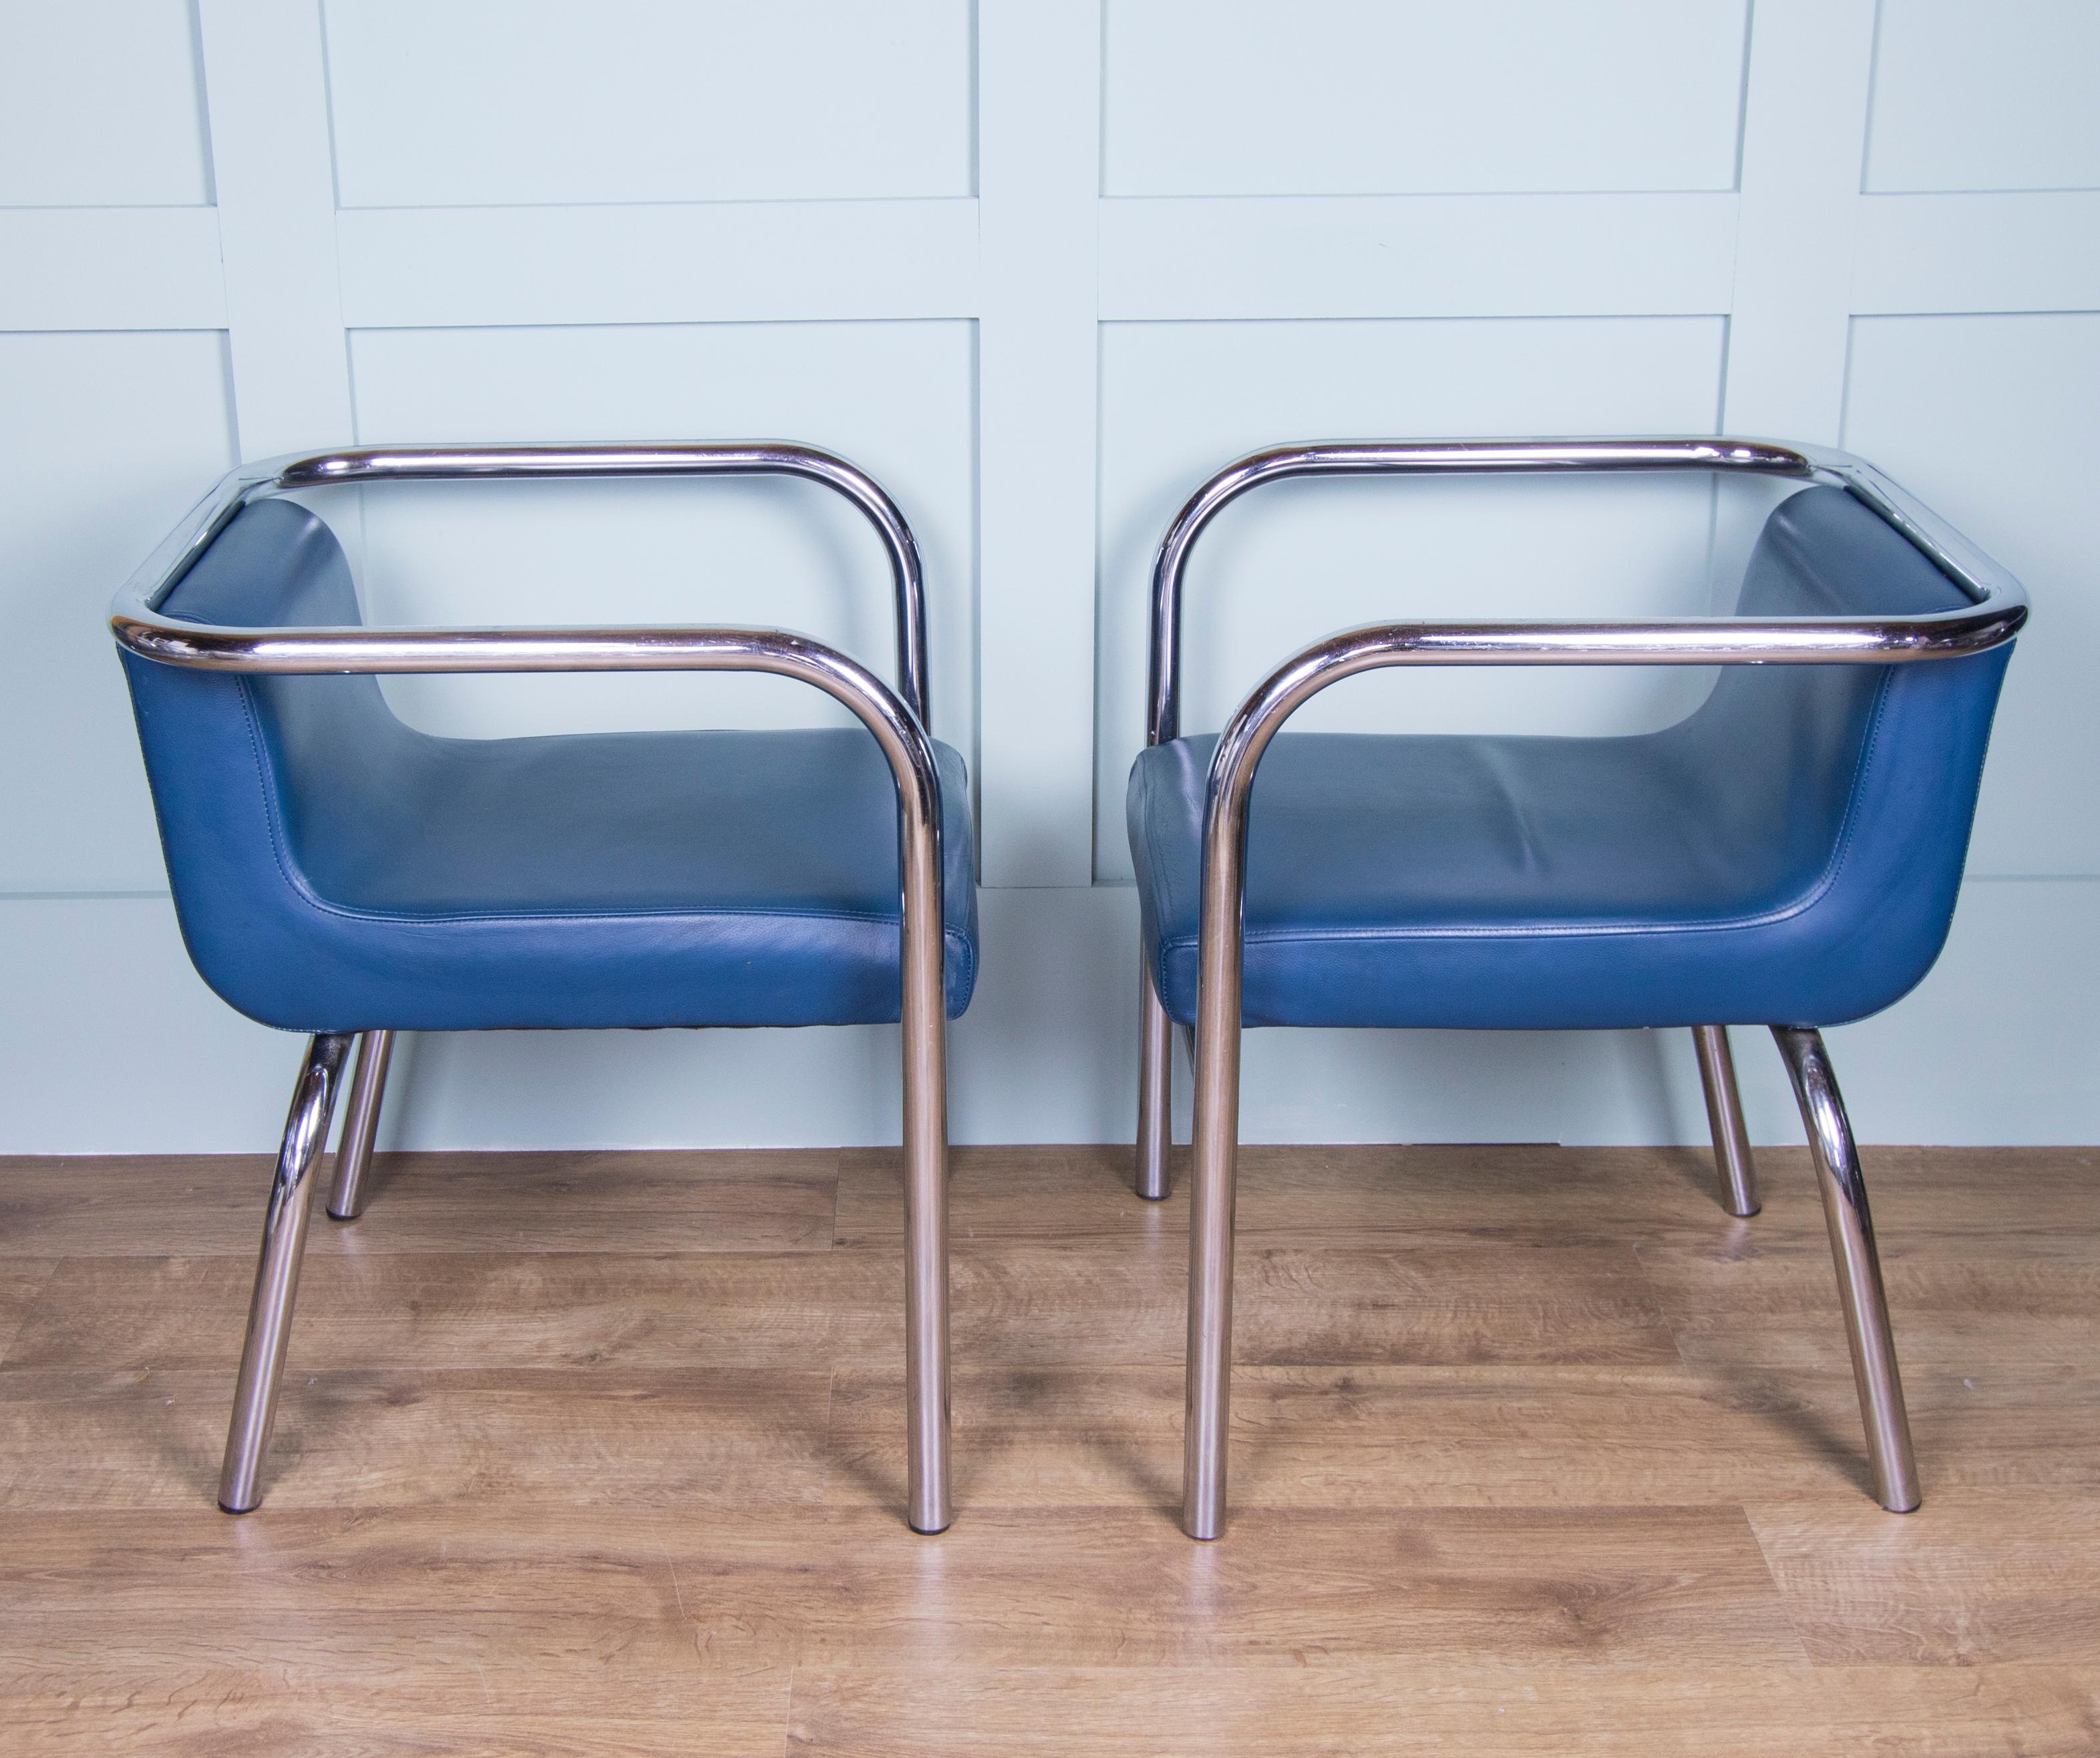 20th Century Set of Six Modernist tubular Steel chairs with Blue Leather seats